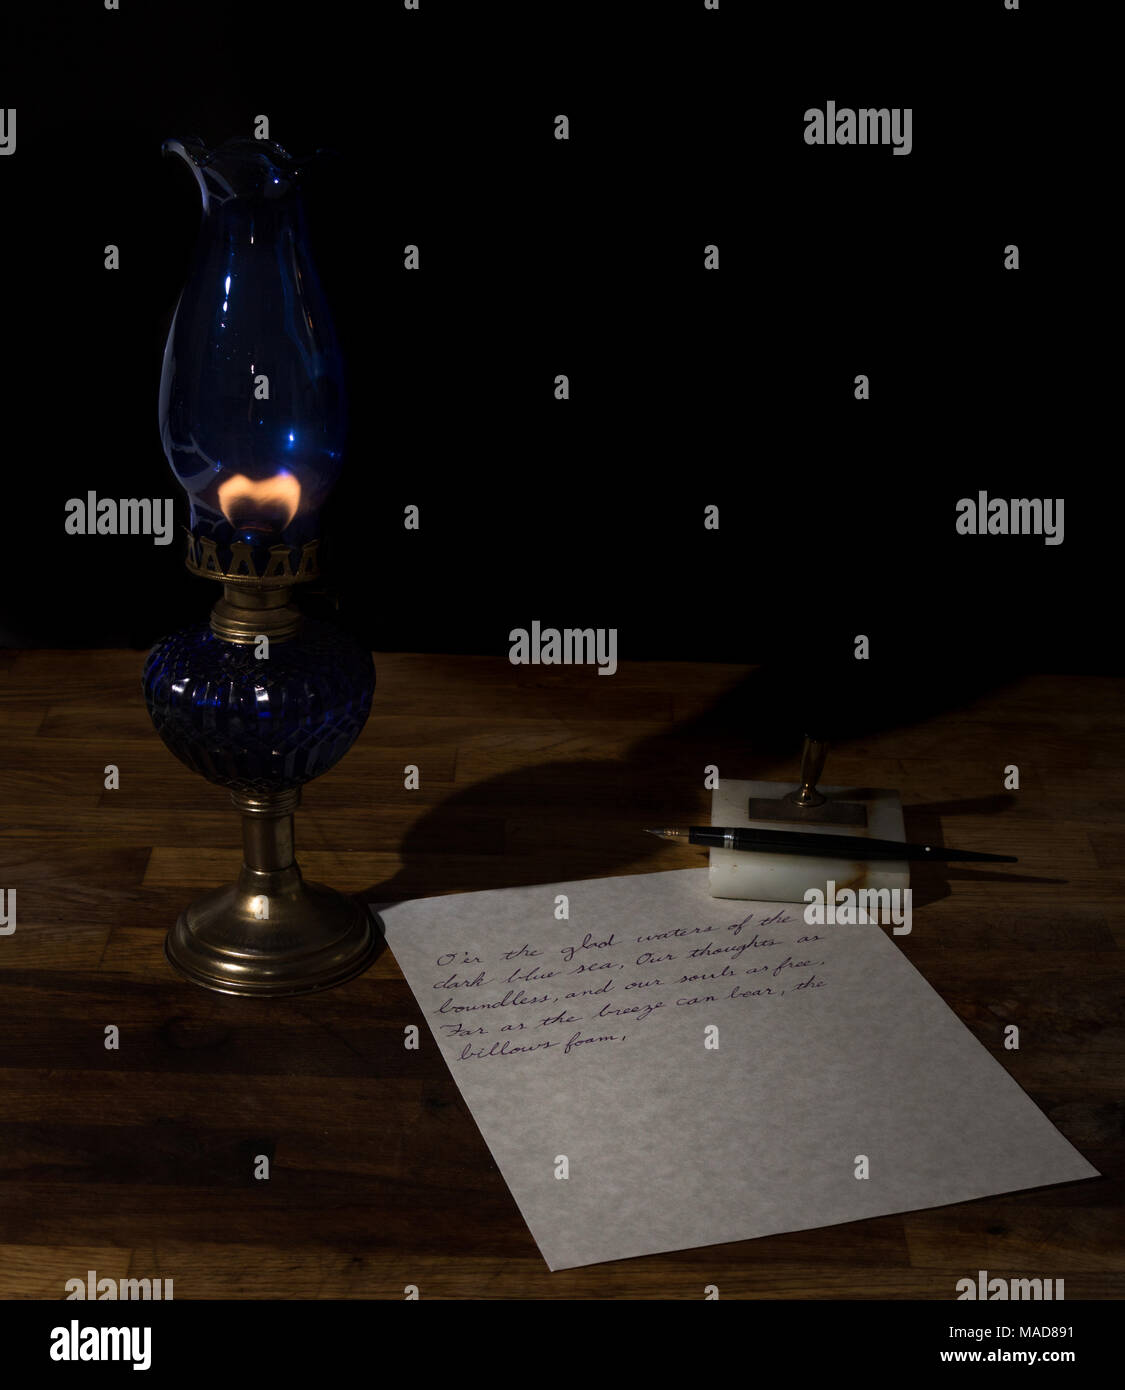 writing in a dimly lit room by an oil lamp Stock Photo